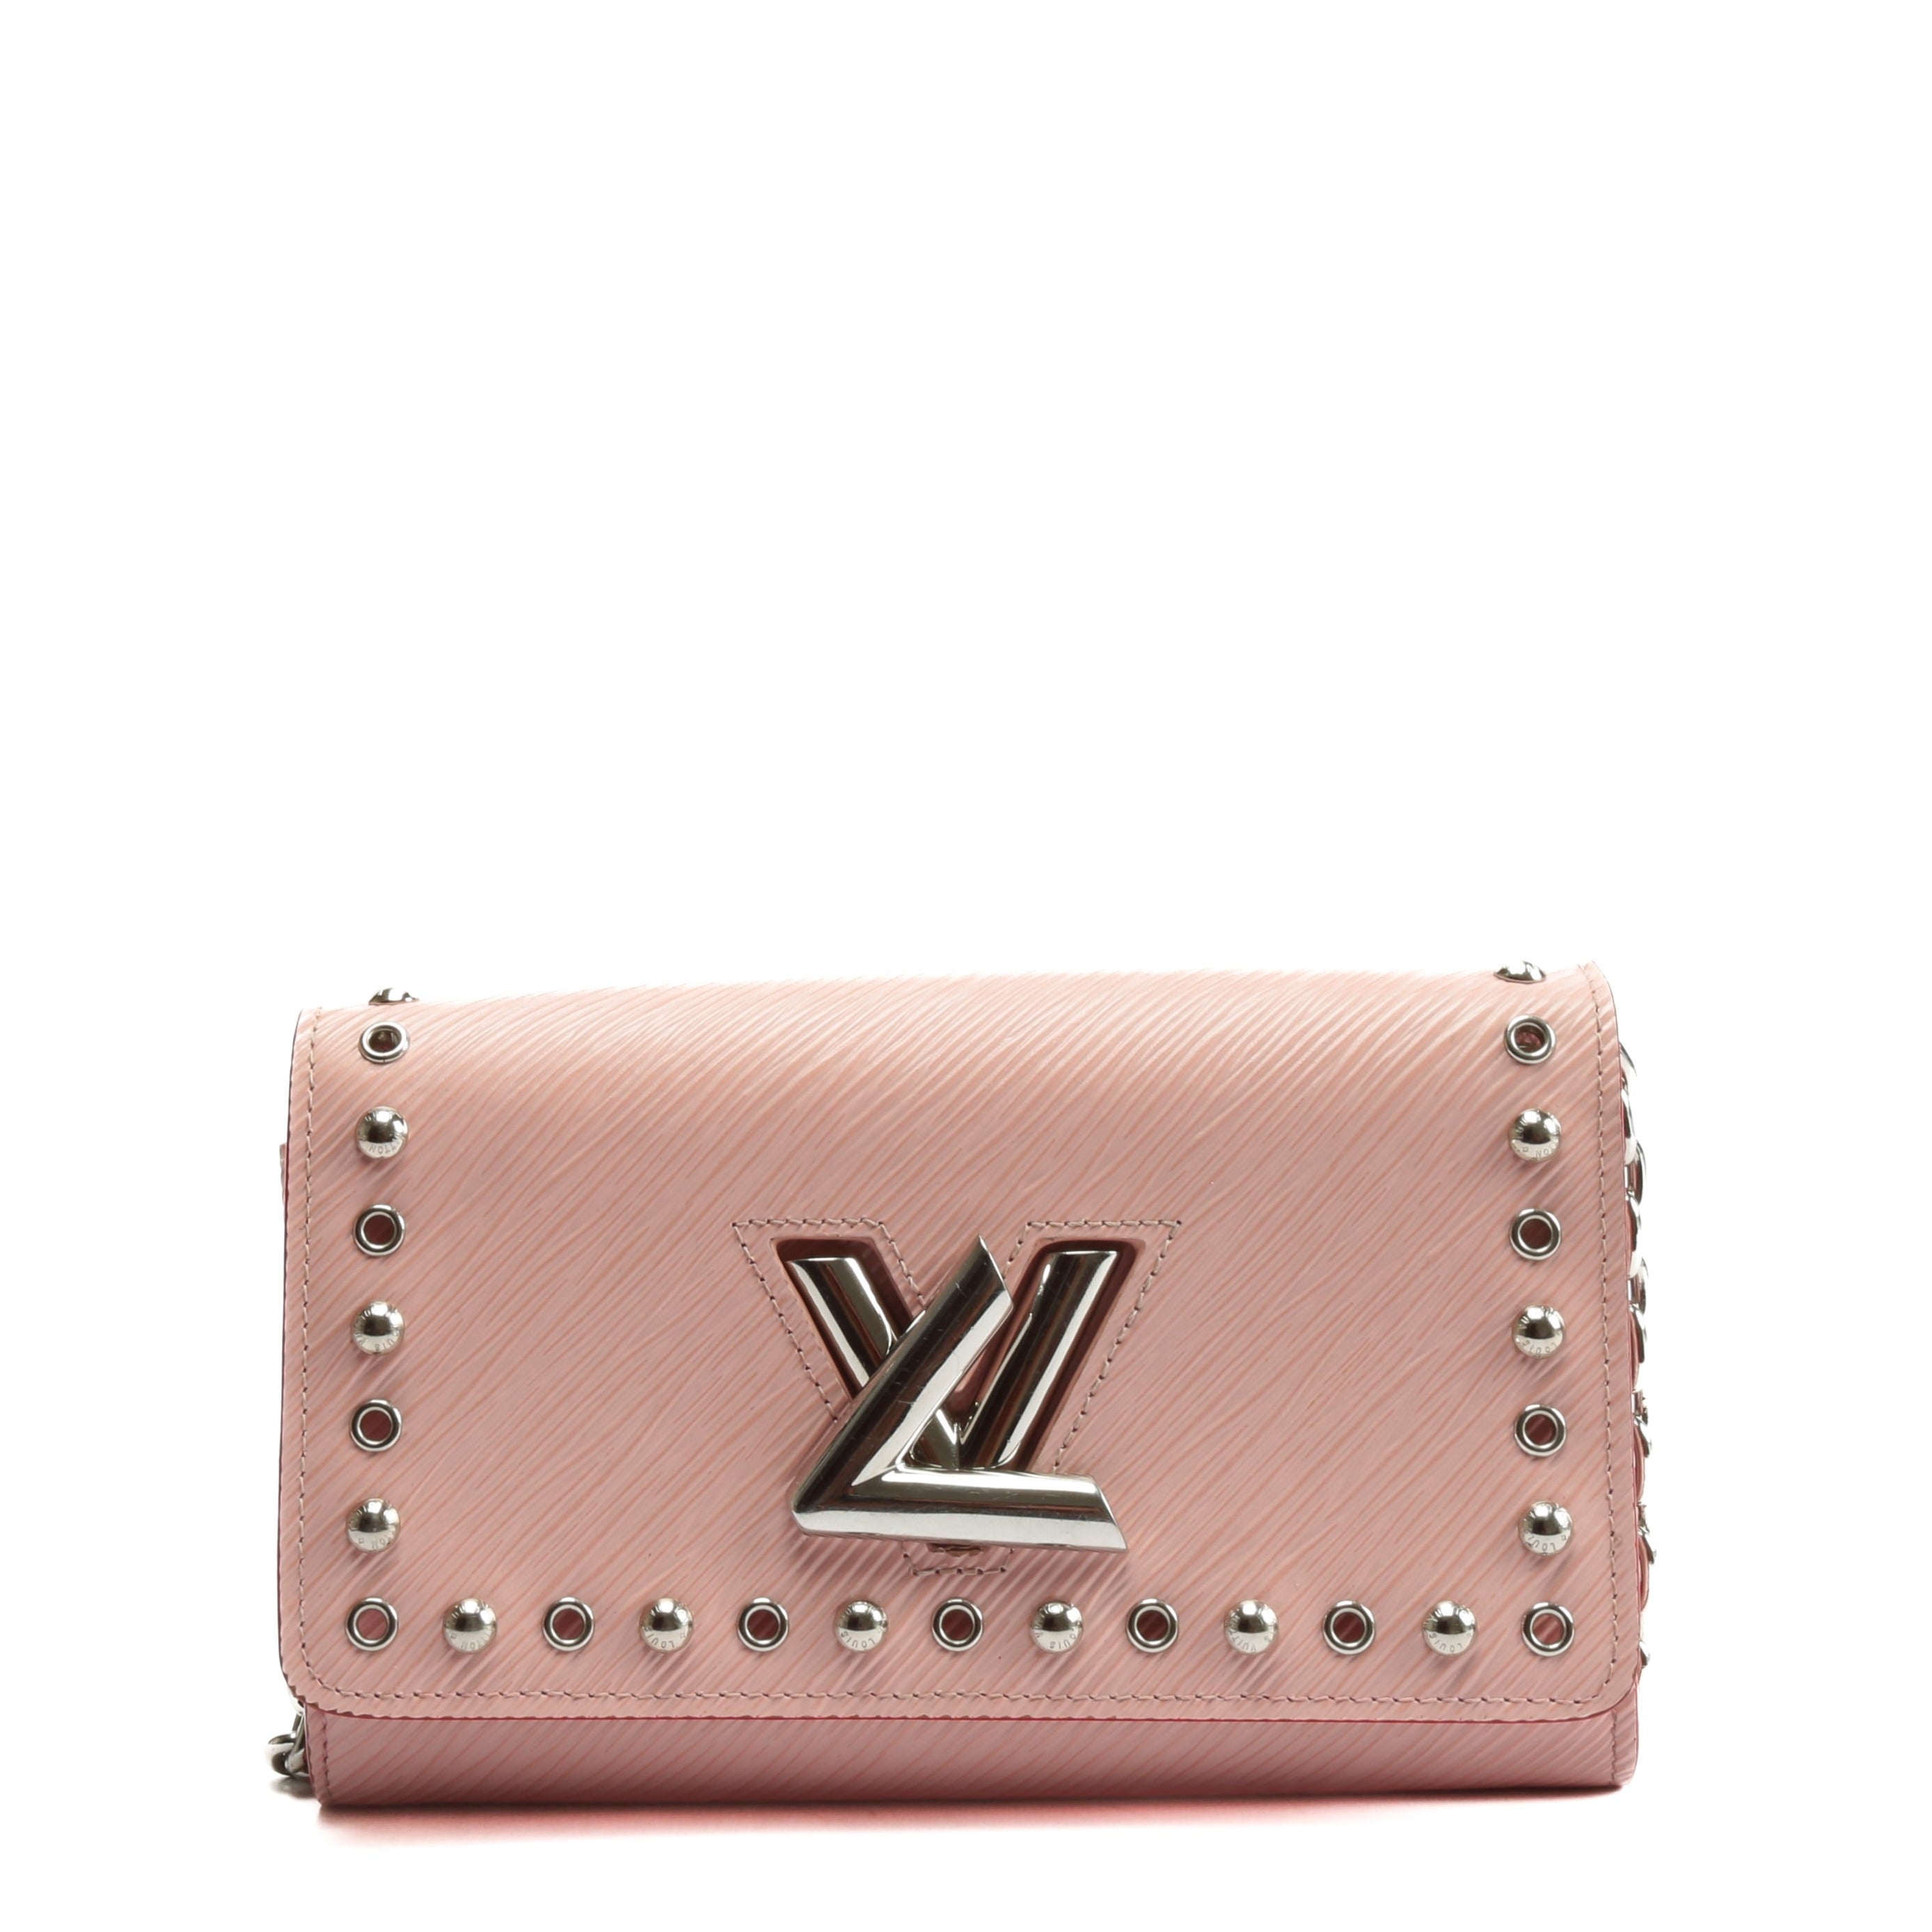 Louis Vuitton Twist Chain Wallet Epi Grained Leather Black in Cowhide  Leather with Gold-tone - US